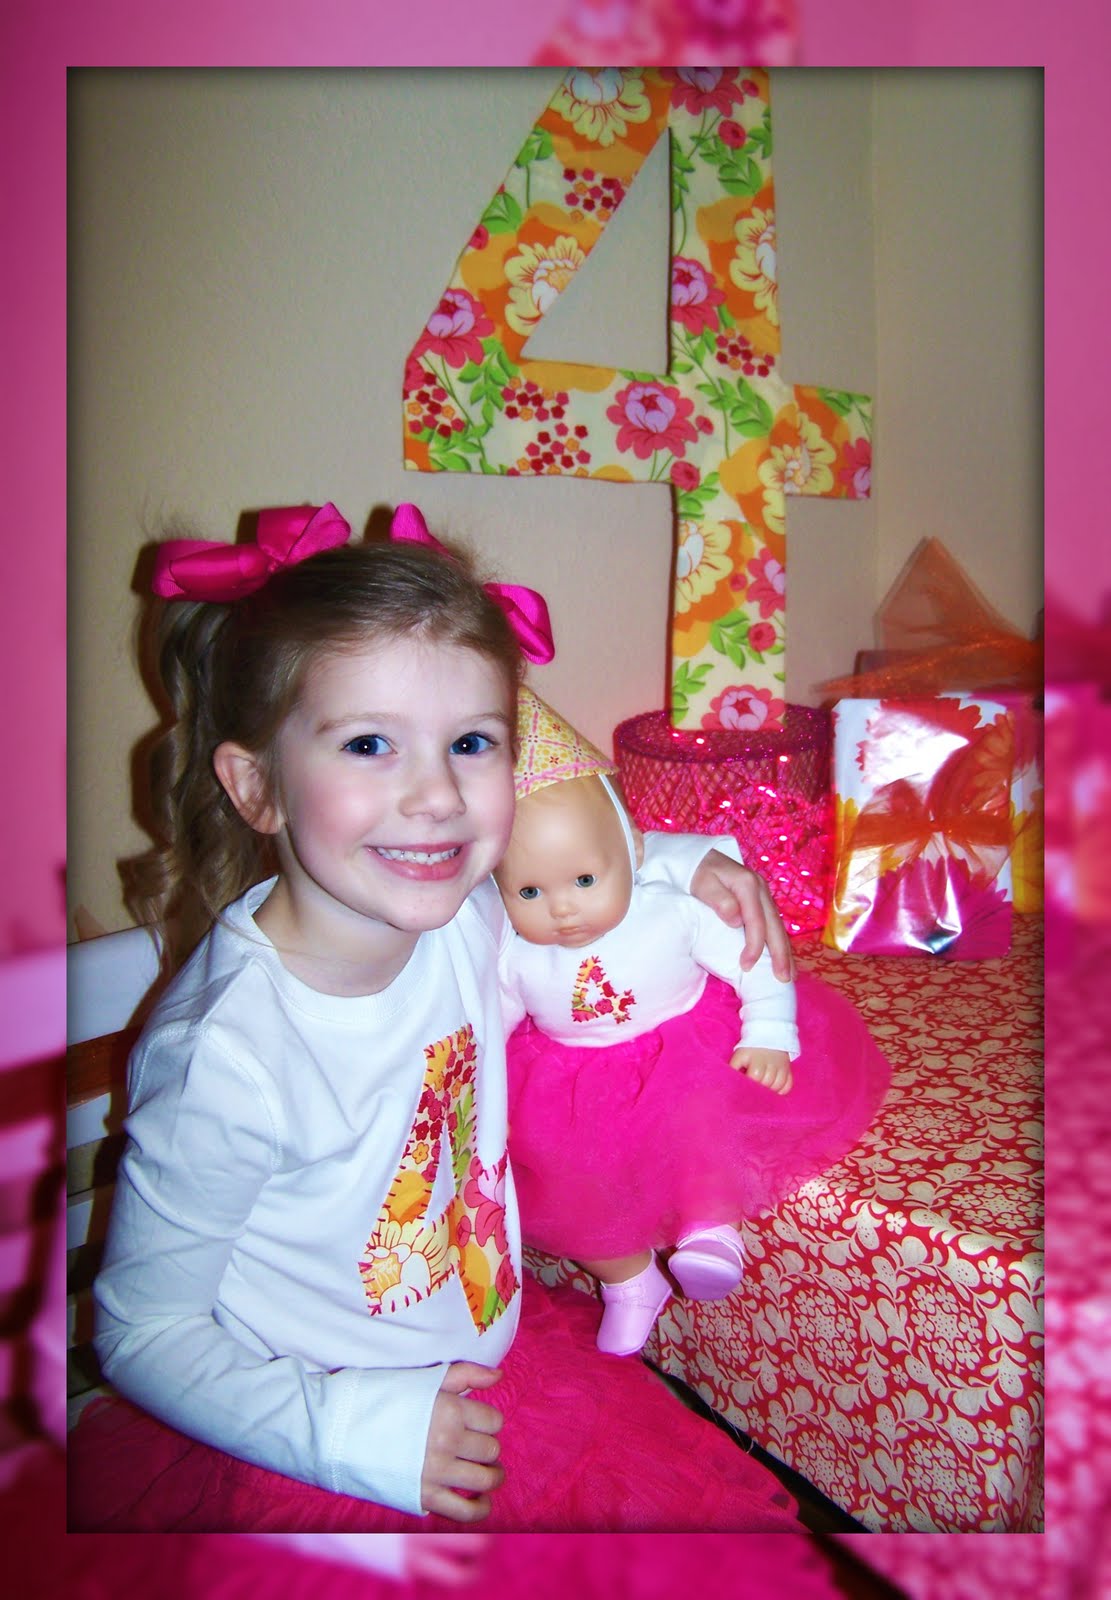 17 Best images about Baby Doll Birthday party on Pinterest ...